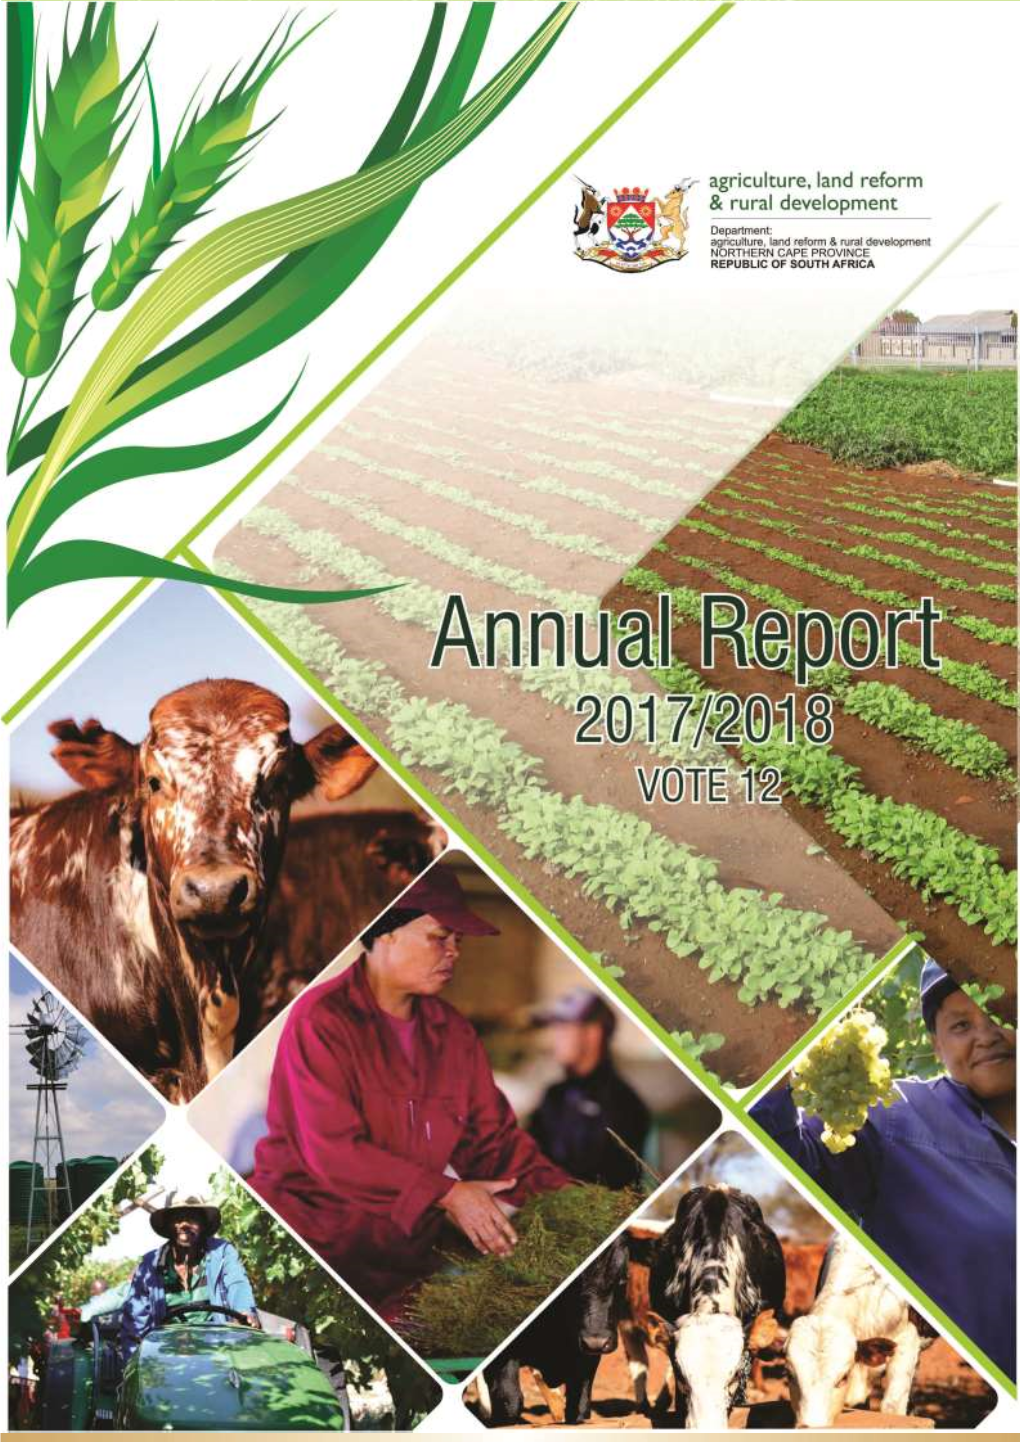 Vote 12 Annual Report 2017/18 Financial Year